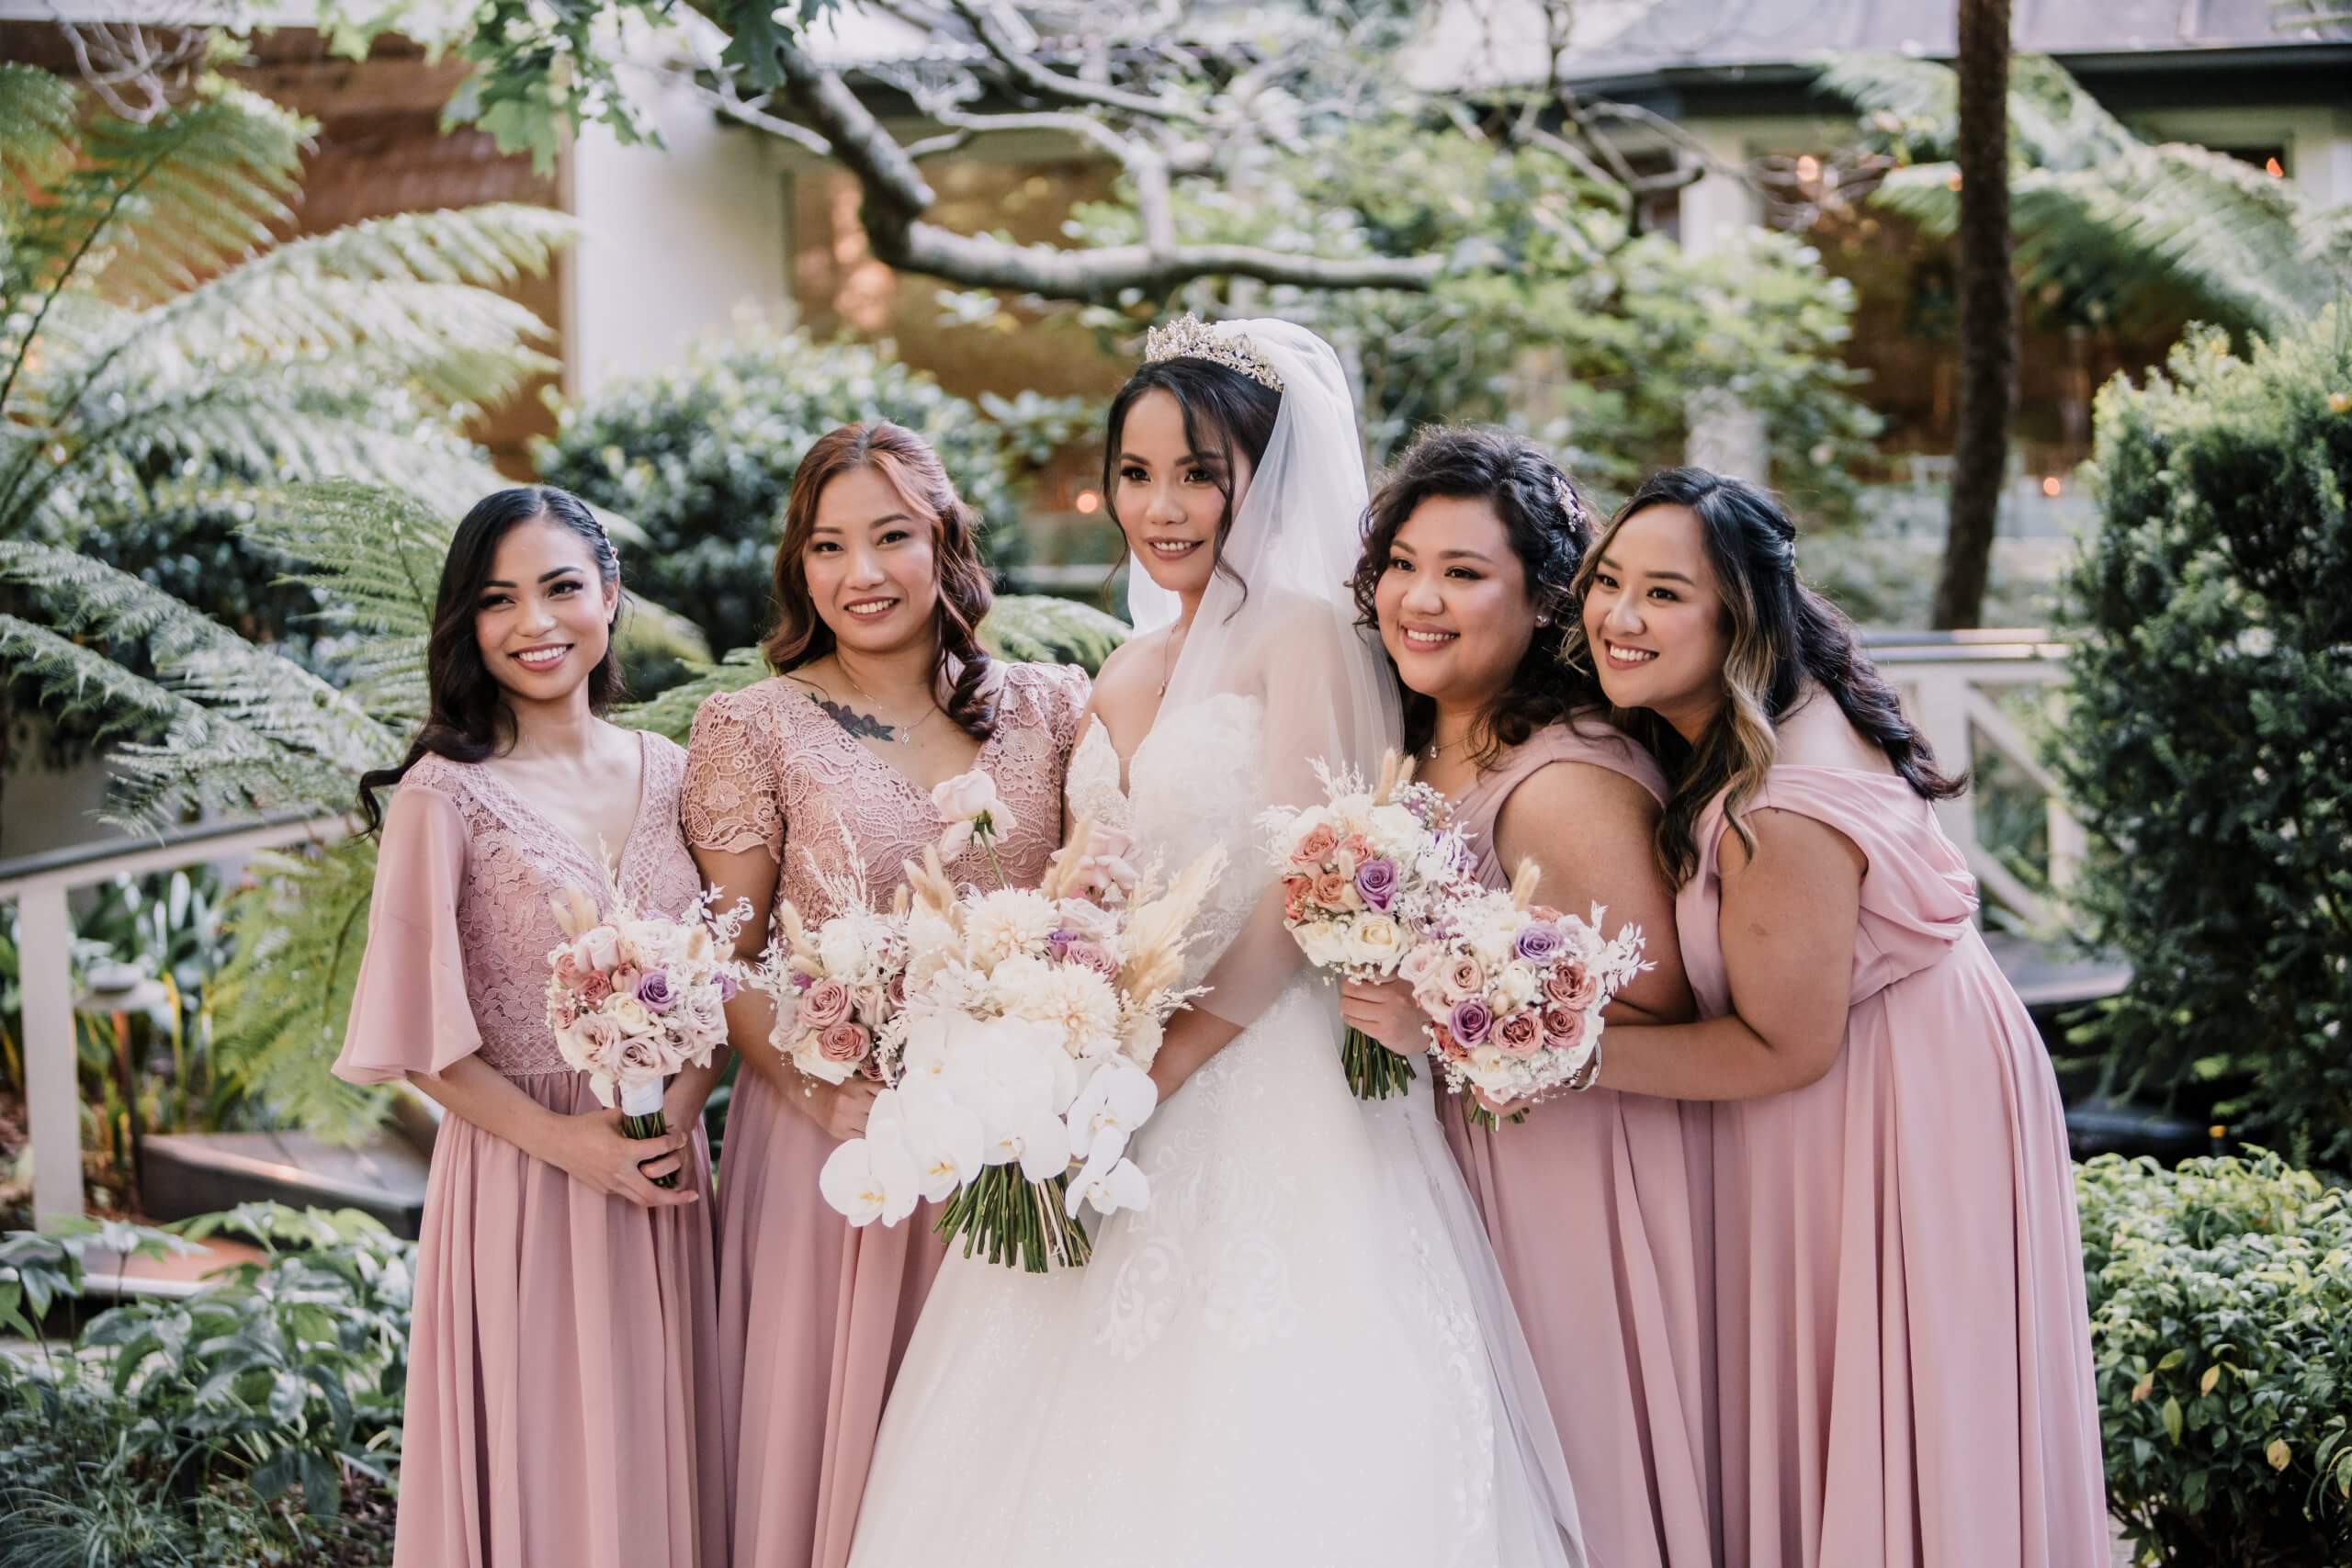 The bride wearing a beautiful ballgown wedding dress and a flowy veil and a tiara is flanked by two bridesmaids on each side while they smile for the camera.